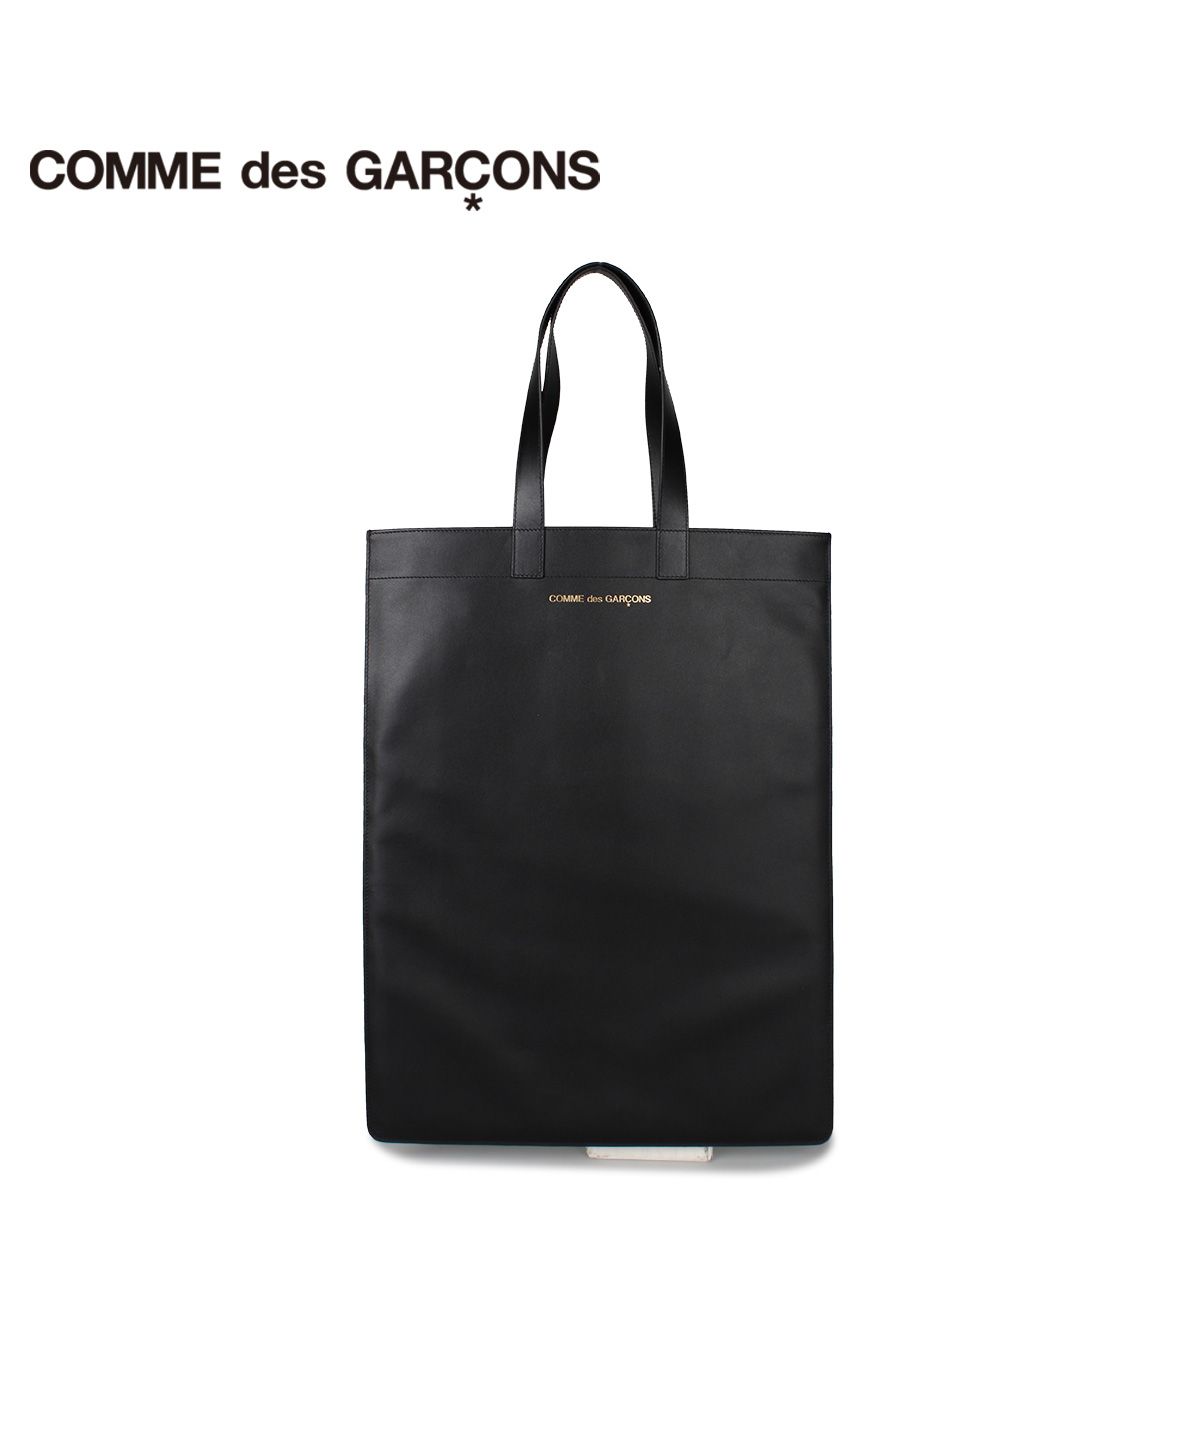 COMME des GARCONS コムデギャルソン トートバッグ - 黒